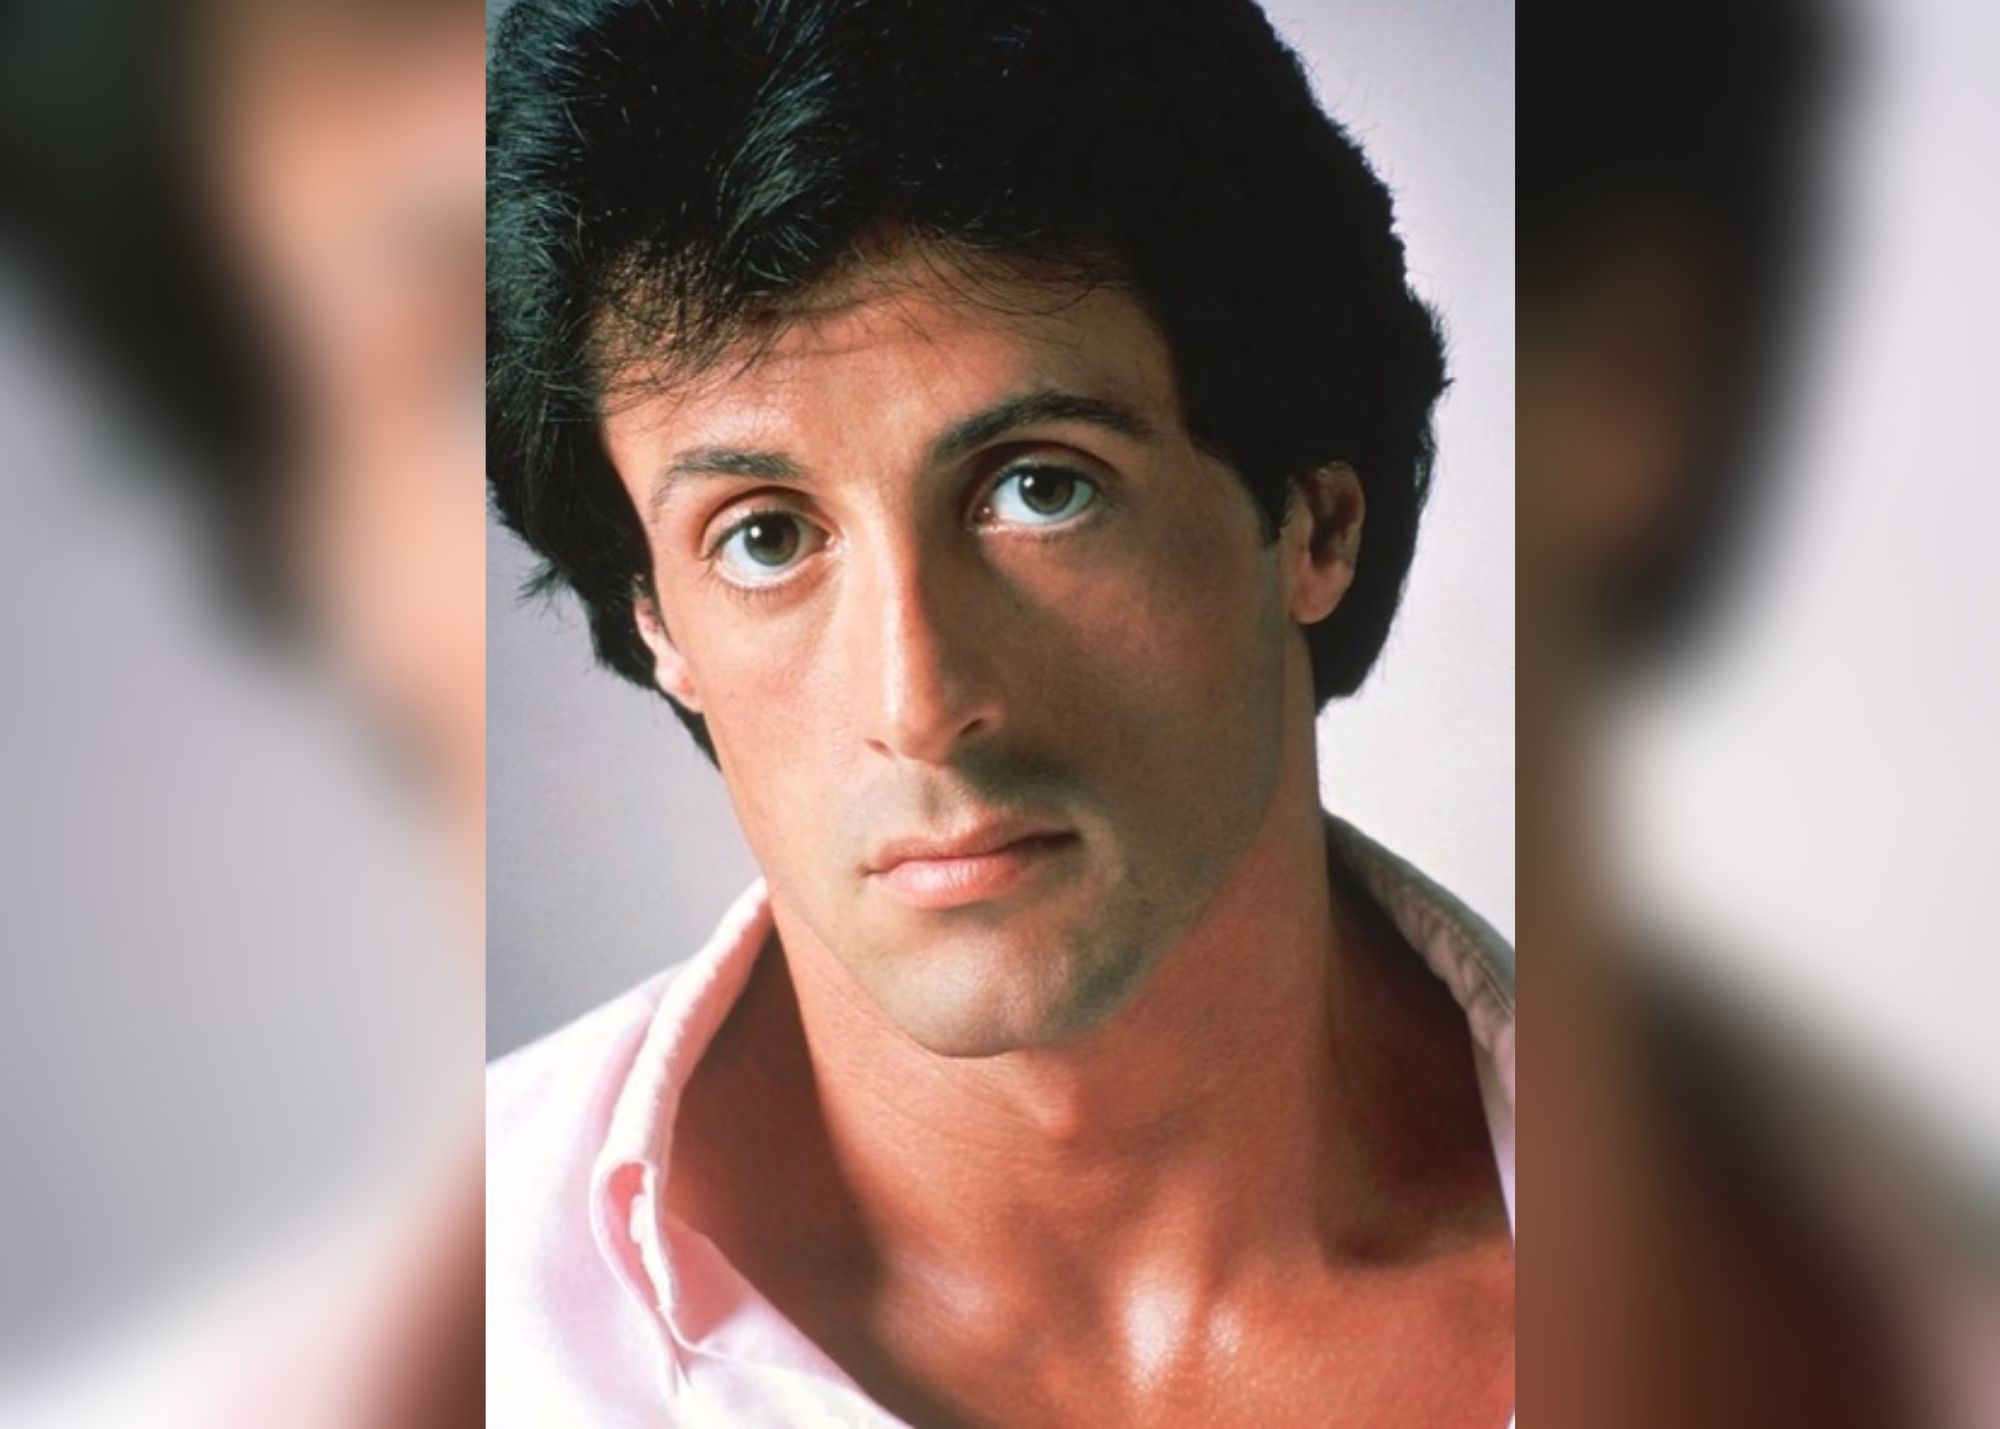 Sylvester Stallone showing a serious face as well as his sanpaku eyes